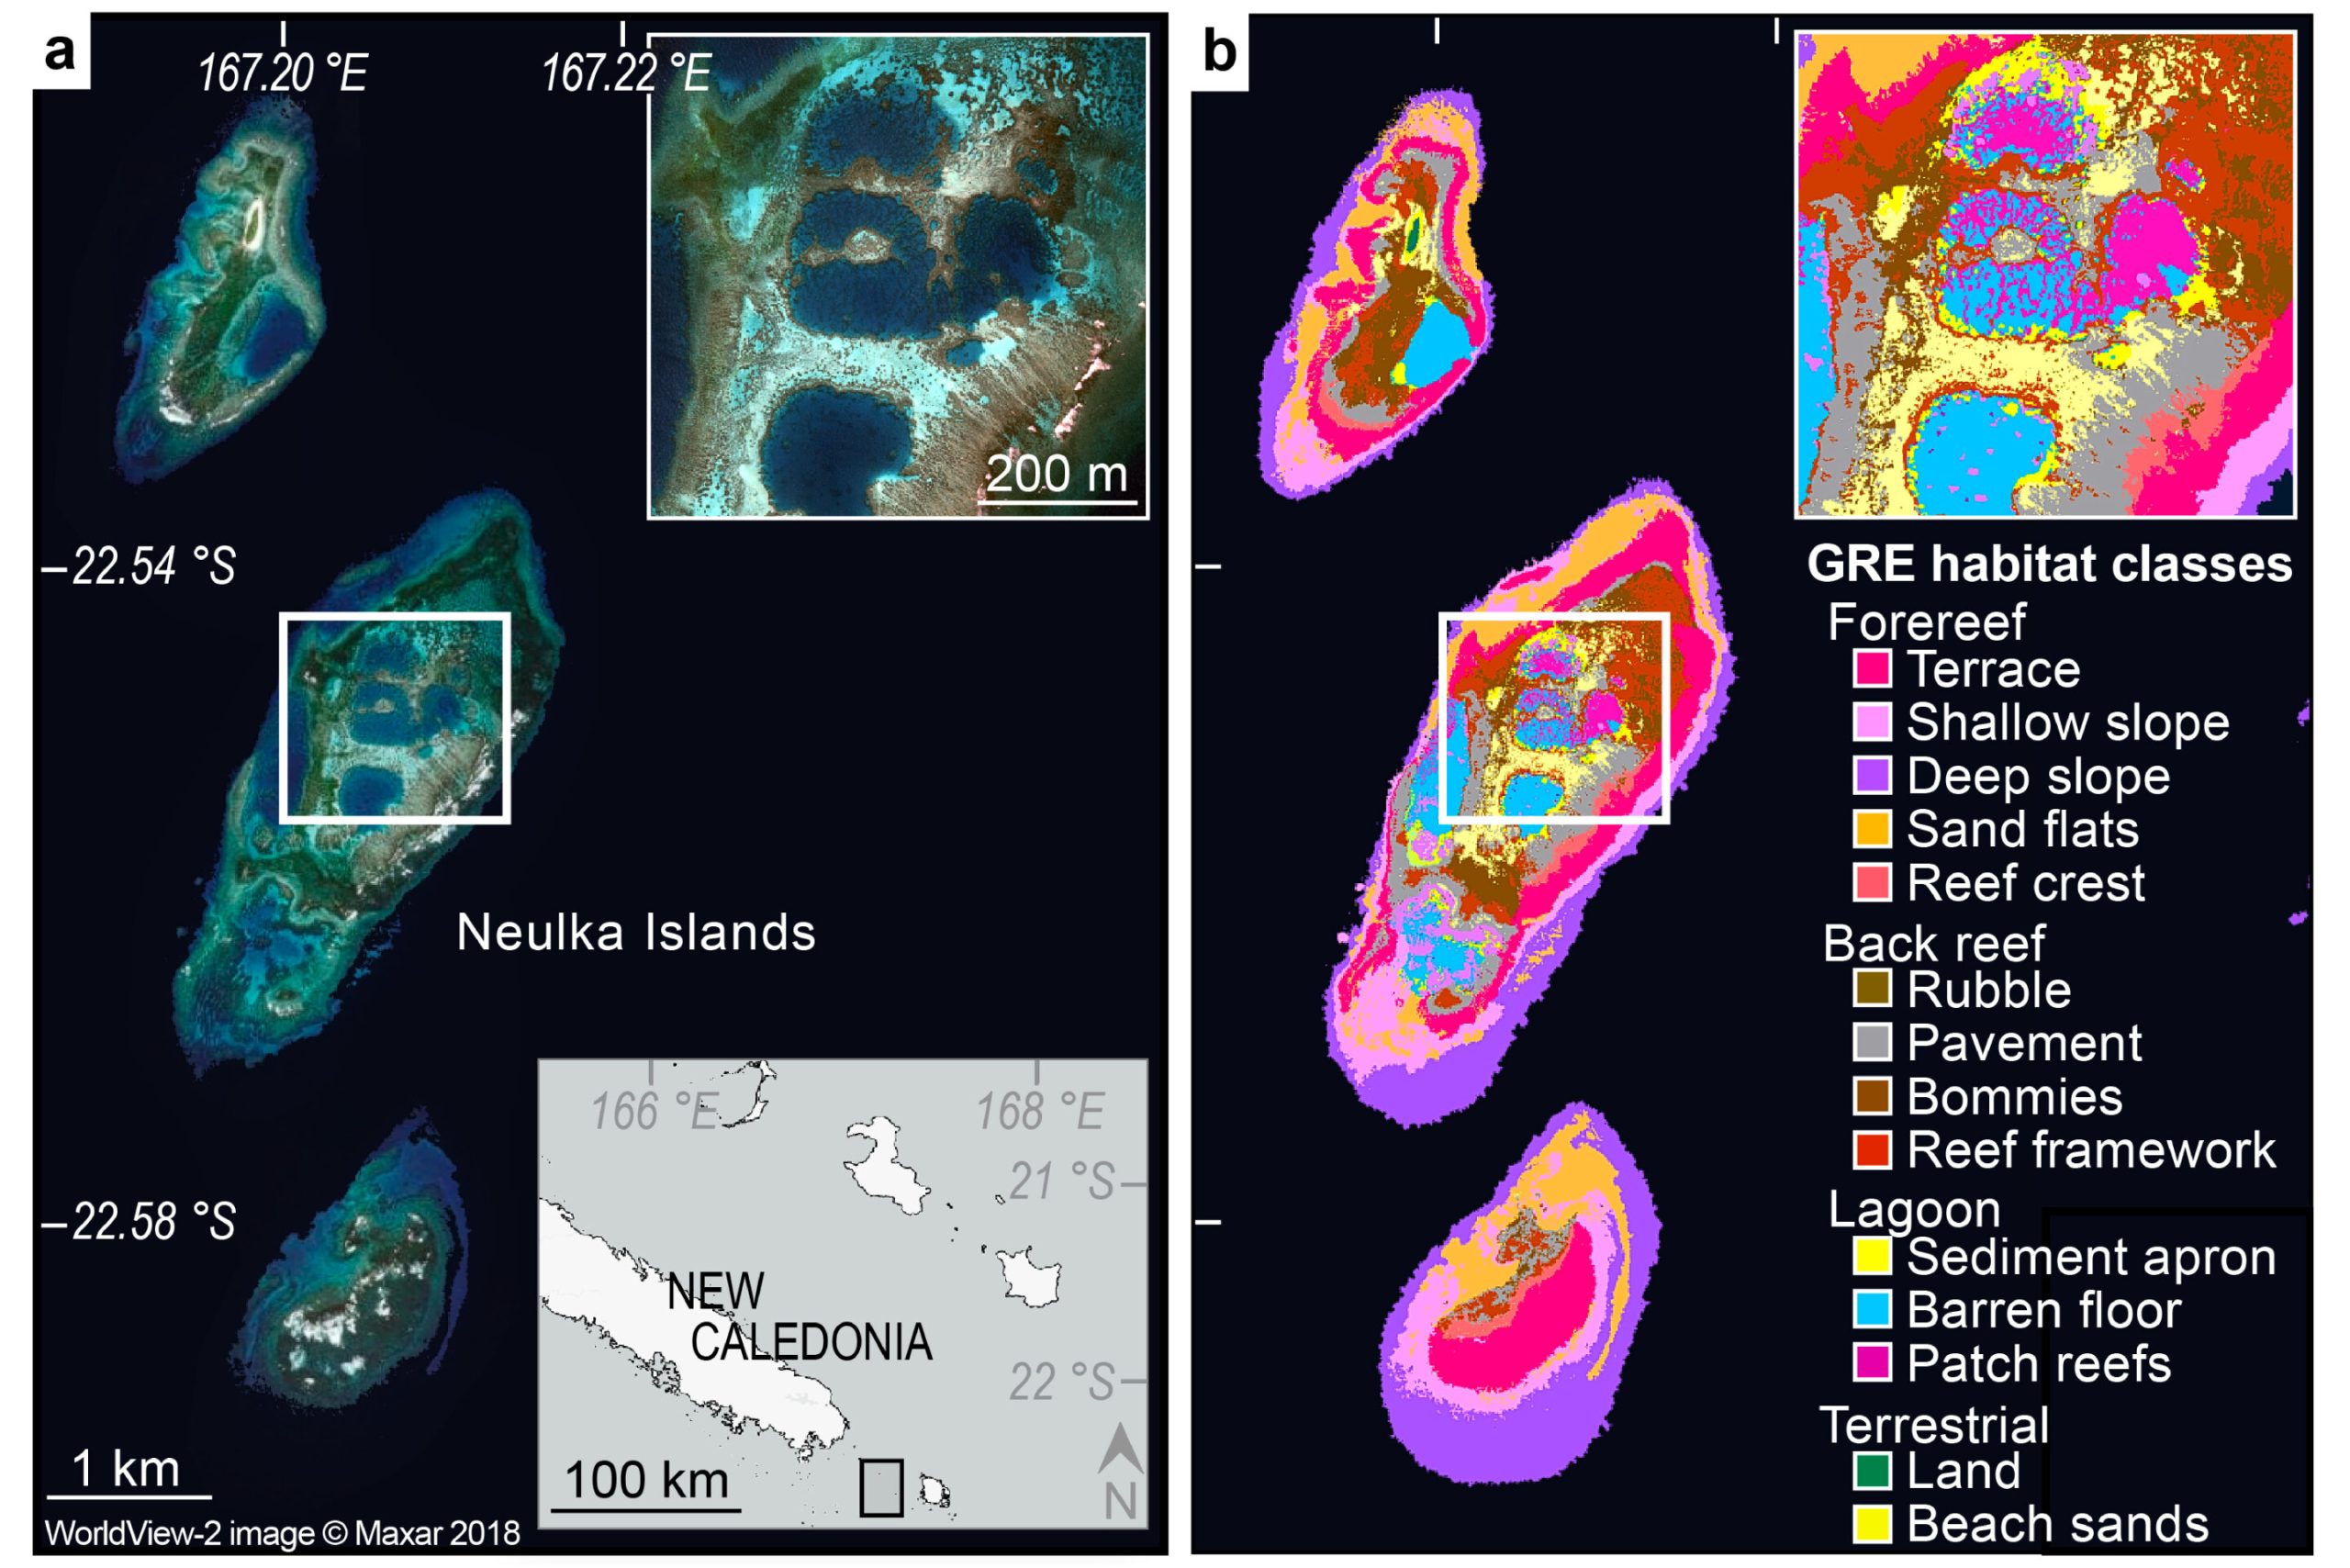 Satellites map global coral reef biodiversity, guiding conservation efforts 1